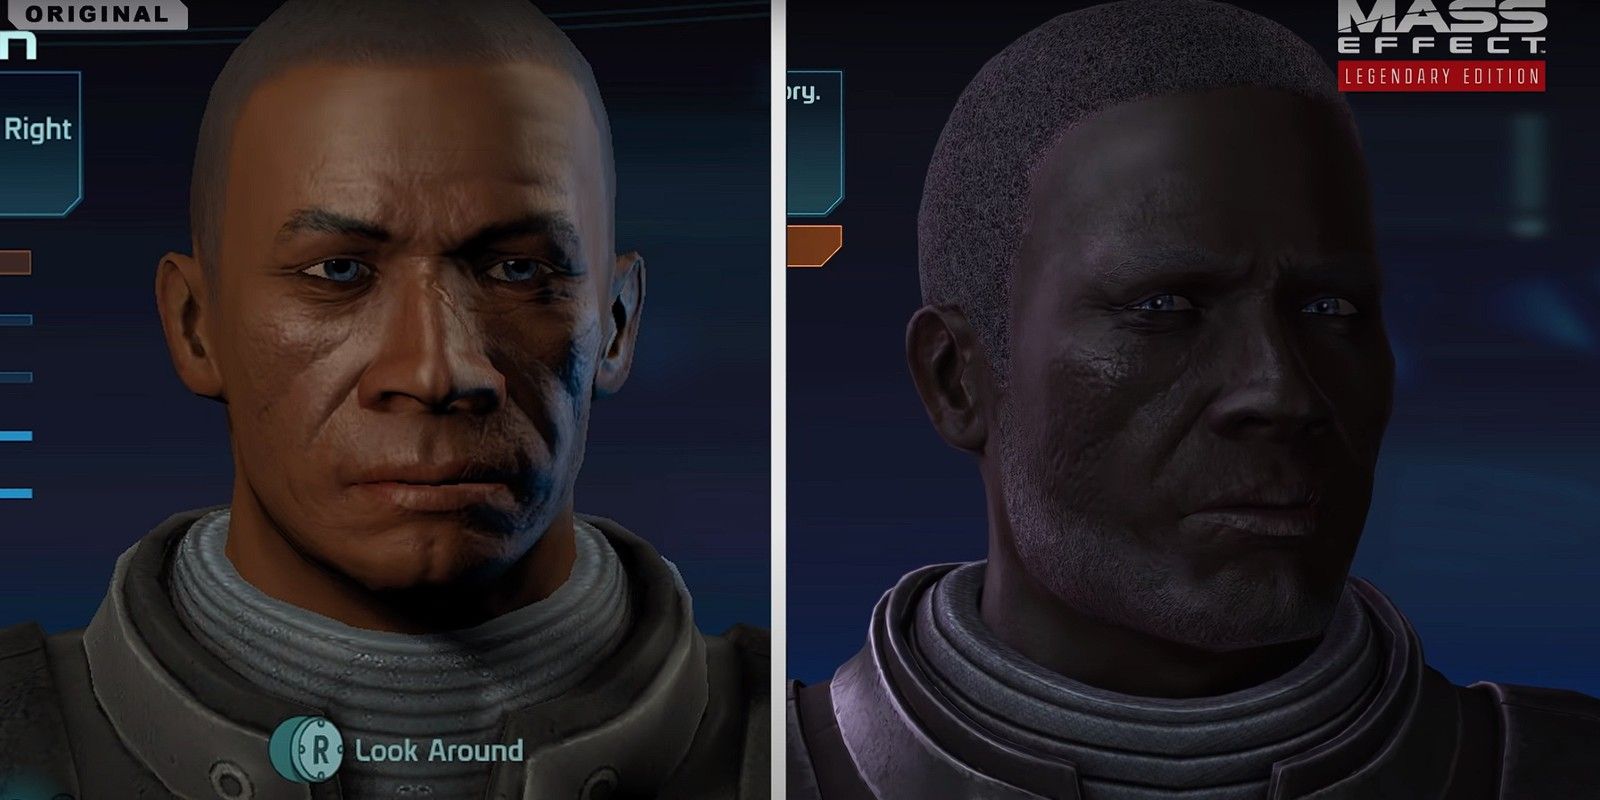 Side-by-side comparison of character creation in Mass Effect: Legendary Edition versus original